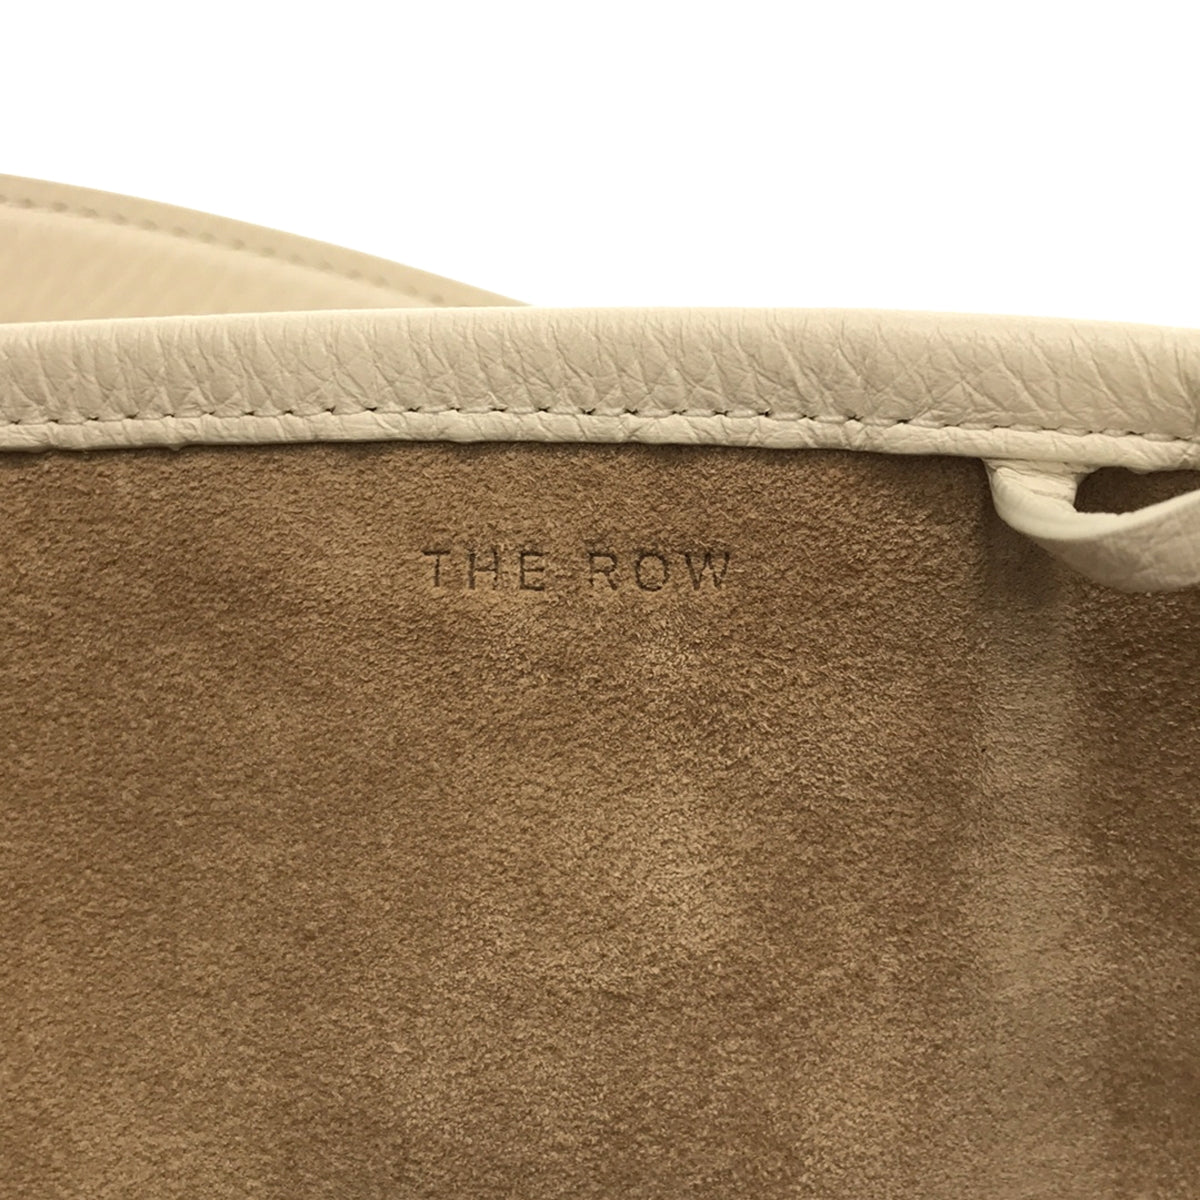 THE ROW / ザロウ | N/S Park Tote バッグ |